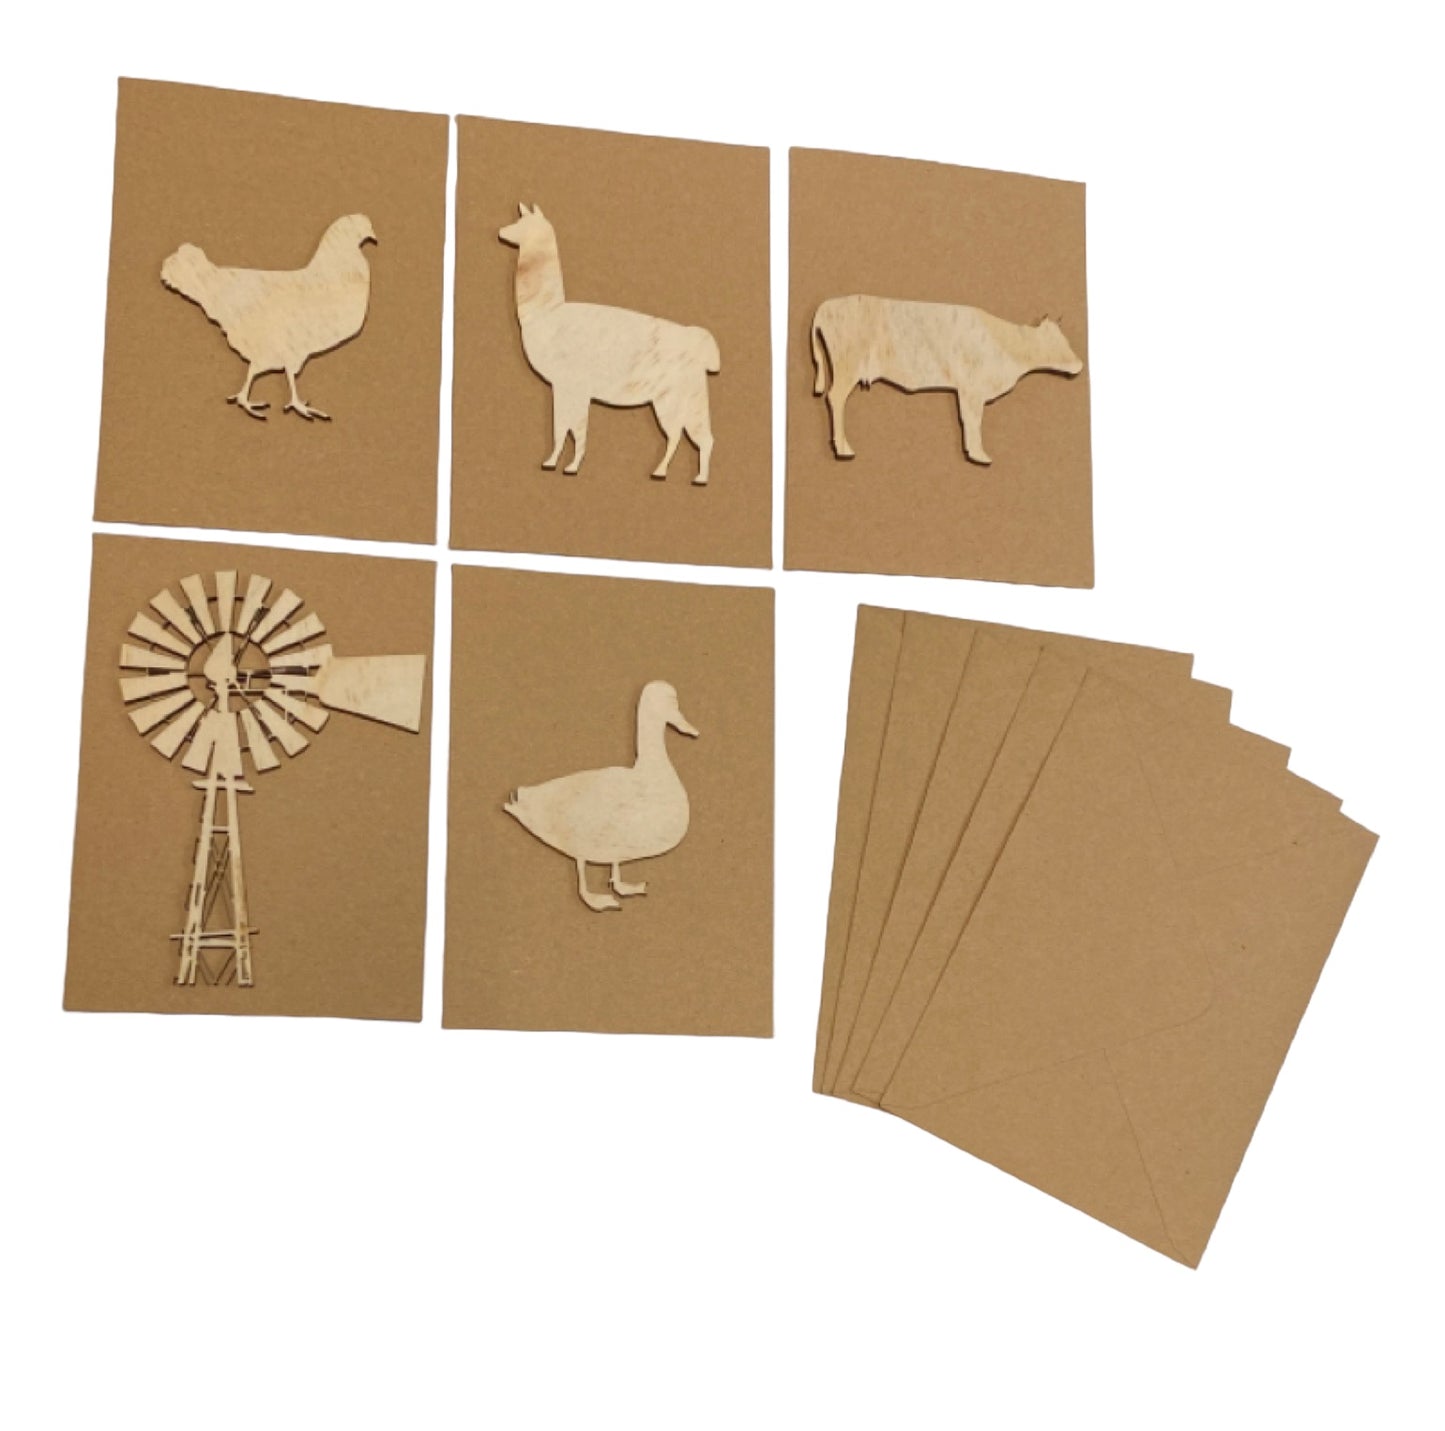 Card Envelope Greeting Set of 5 Country Farm - The Renmy Store Homewares & Gifts 